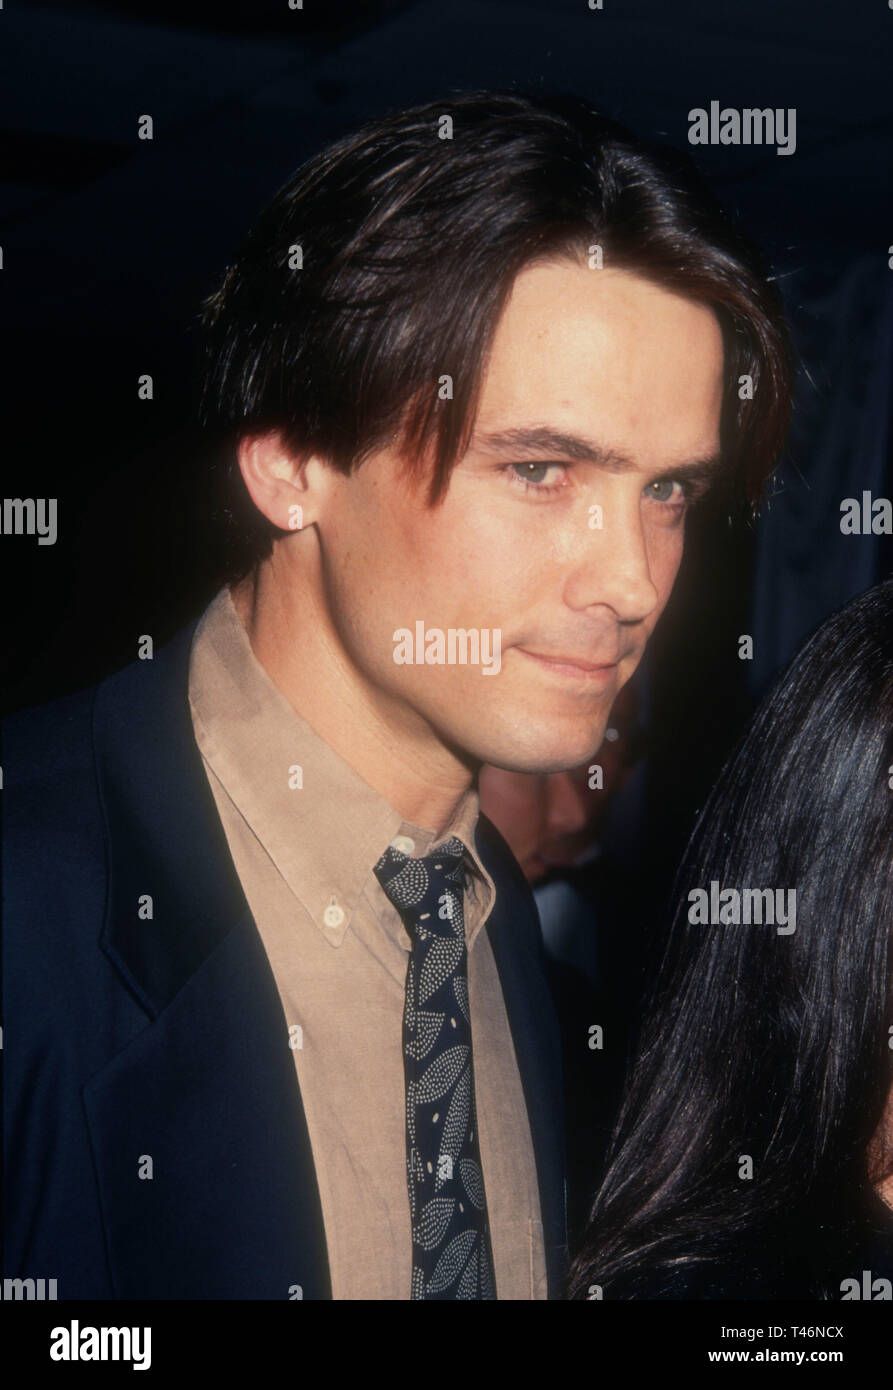 century-city-california-usa-19th-march-1994-actor-billy-campbell-attends-the-fifth-annual-glaad-media-awards-on-march-19-1994-at-the-century-plaza-hotel-in-century-city-california-usa-photo-by-barry-kingalamy-stock-photo-T46NCX.jpg